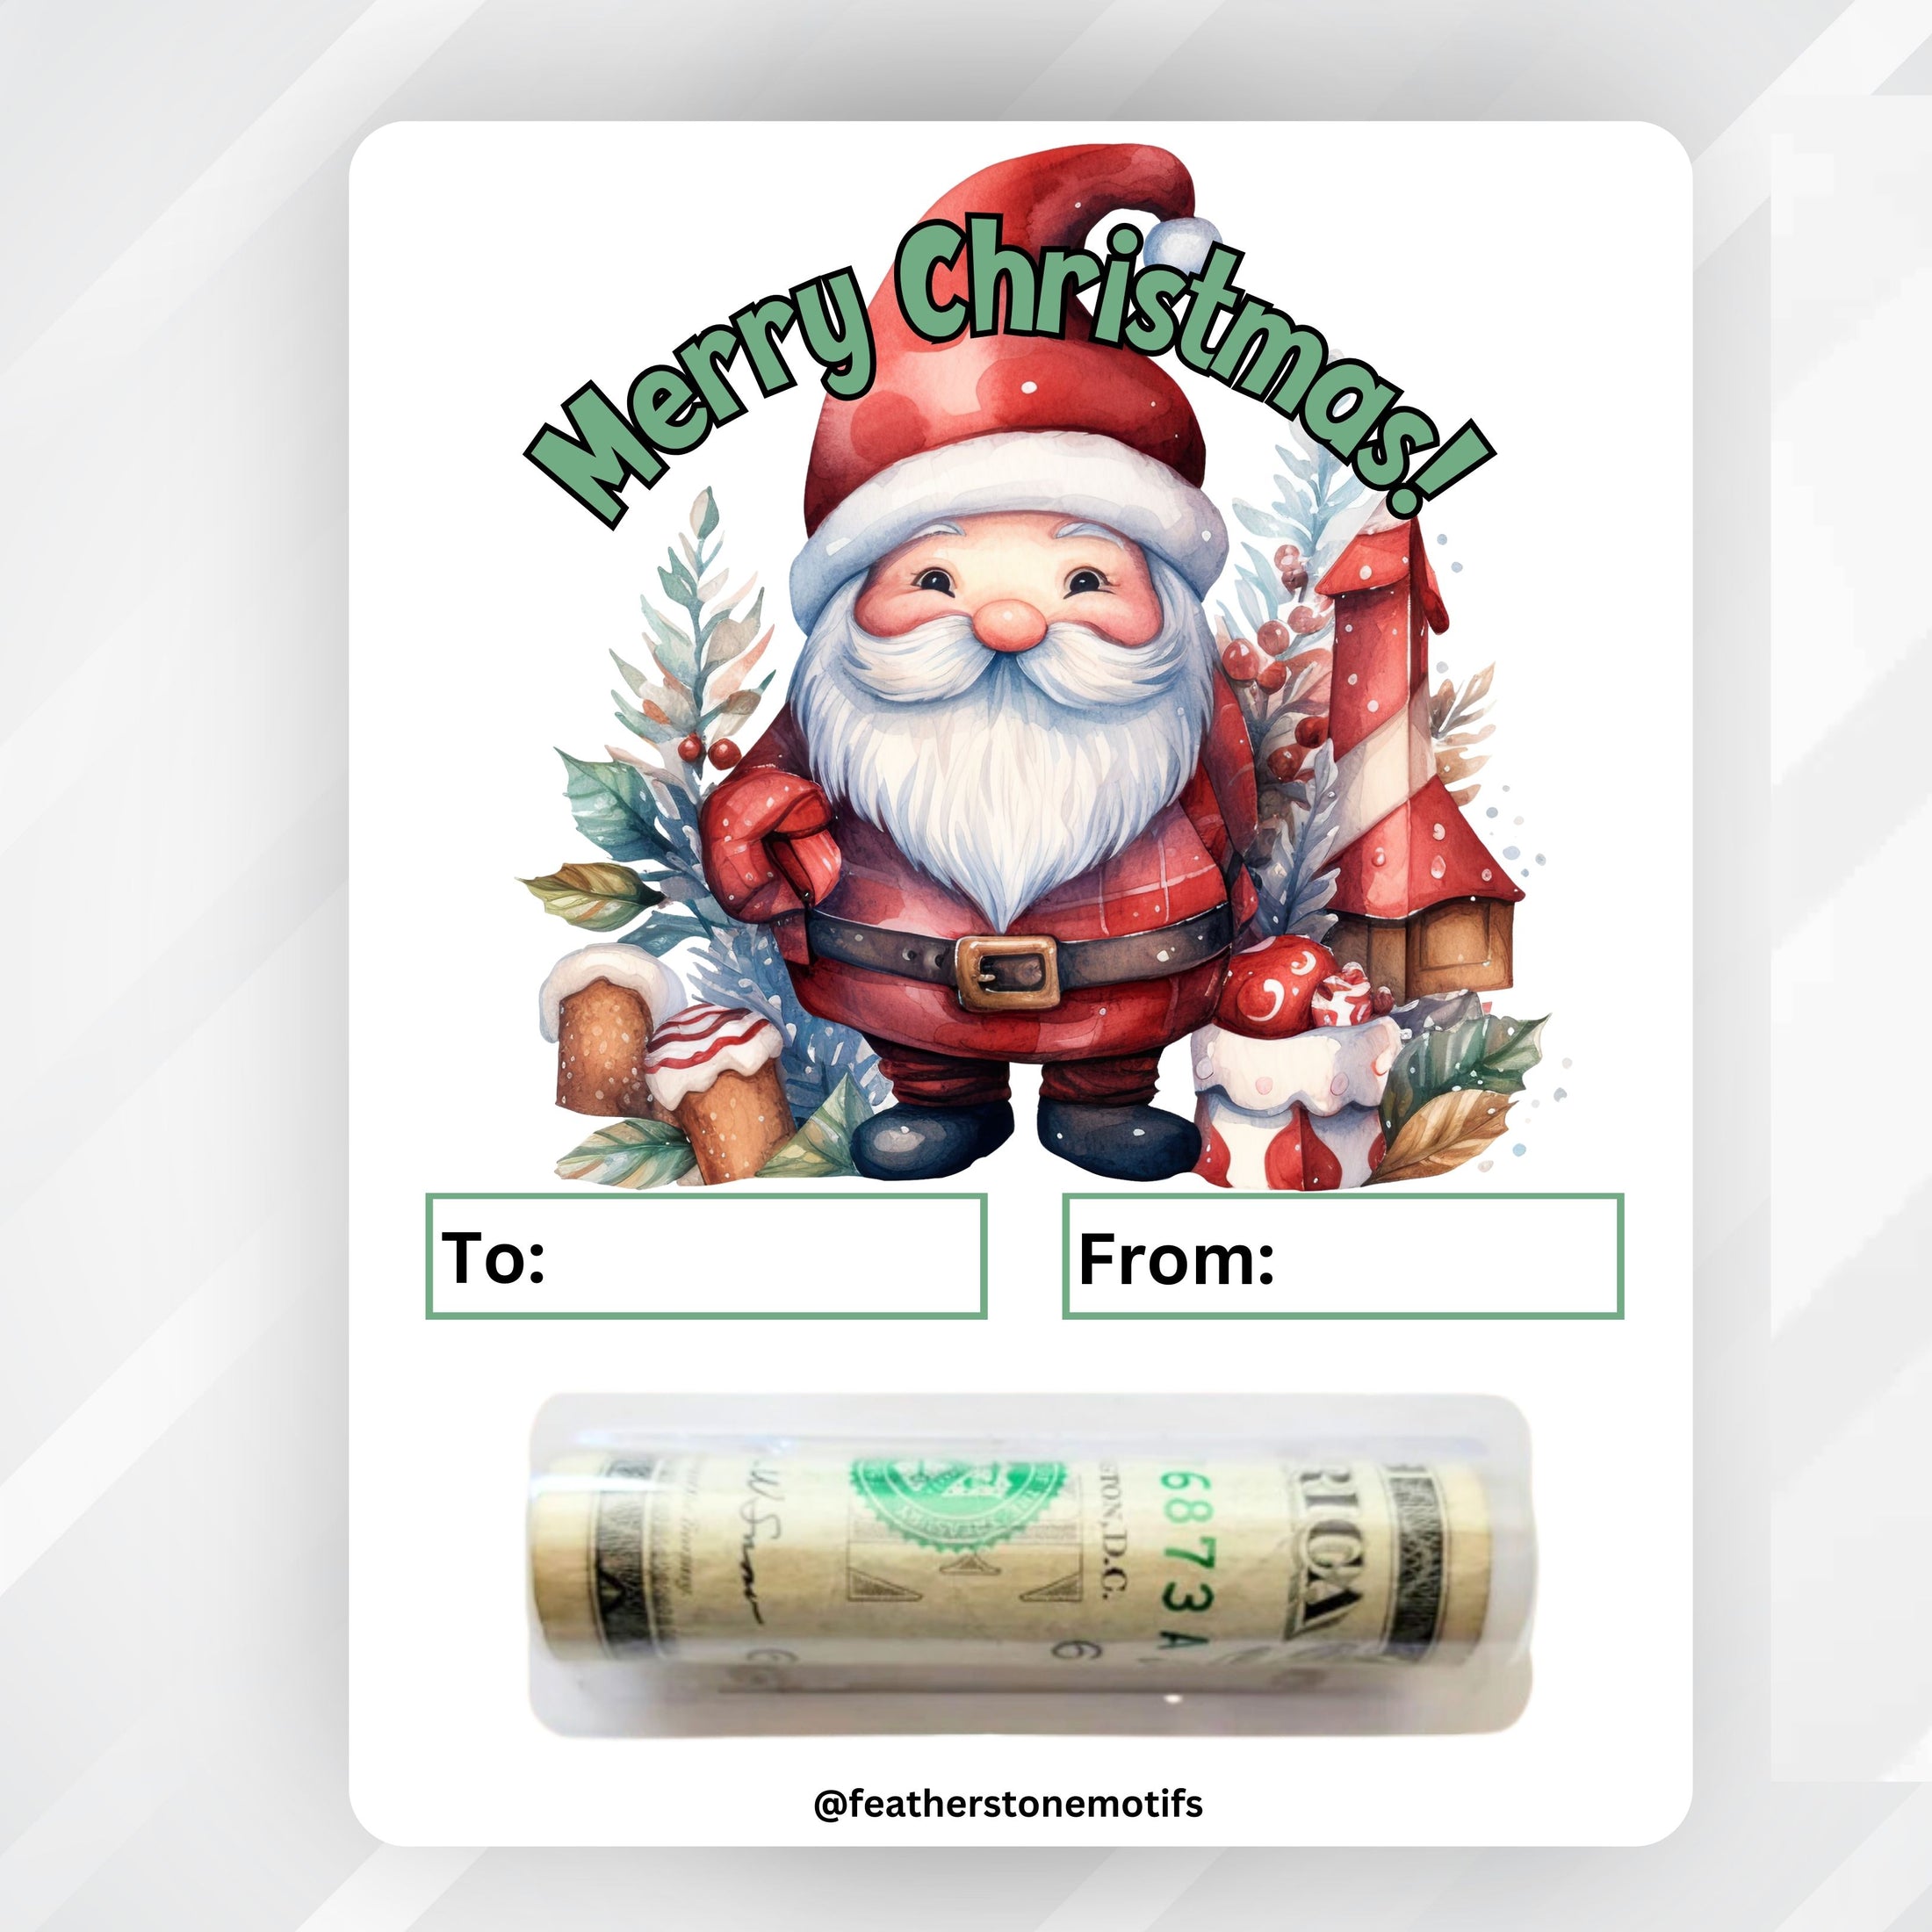 This image shows the Santa Christmas money card with money tube attached.